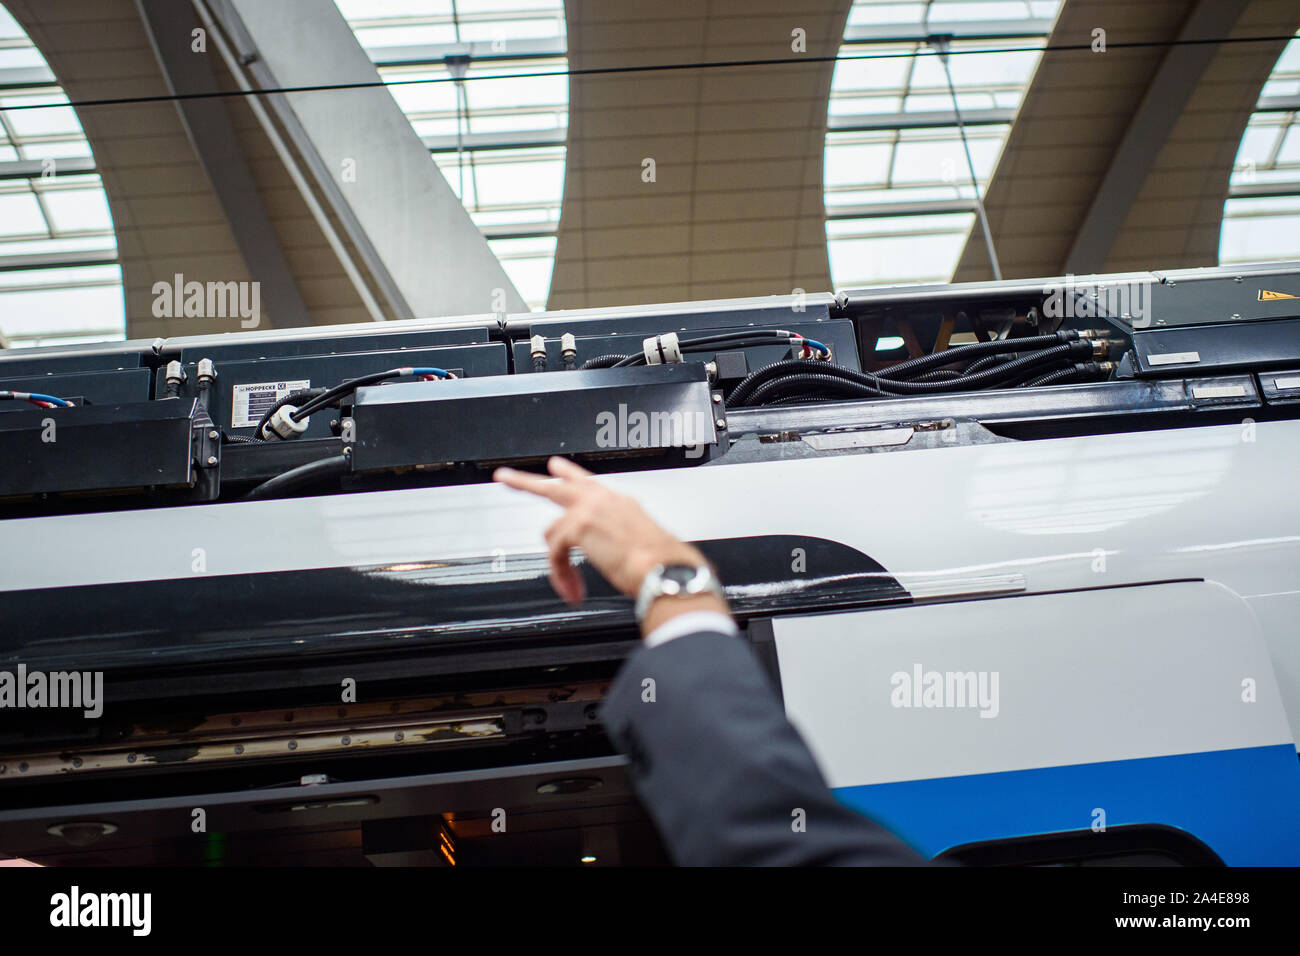 Kiel, Germany. 14th Oct, 2019. An employee of Stadler Pankow GmbH points to the battery carrier on the roof of the railcar during the presentation of one of the 'FLIRT battery' test trains at Kiel main station. Stadler and the Schleswig-Holstein public transport association have signed a supply contract for 55 battery-powered railcars. The first battery multiple units are to be deployed in the northern and eastern networks of Schleswig-Holstein at the end of 2022. Credit: Gregor Fischer/dpa/Alamy Live News Stock Photo